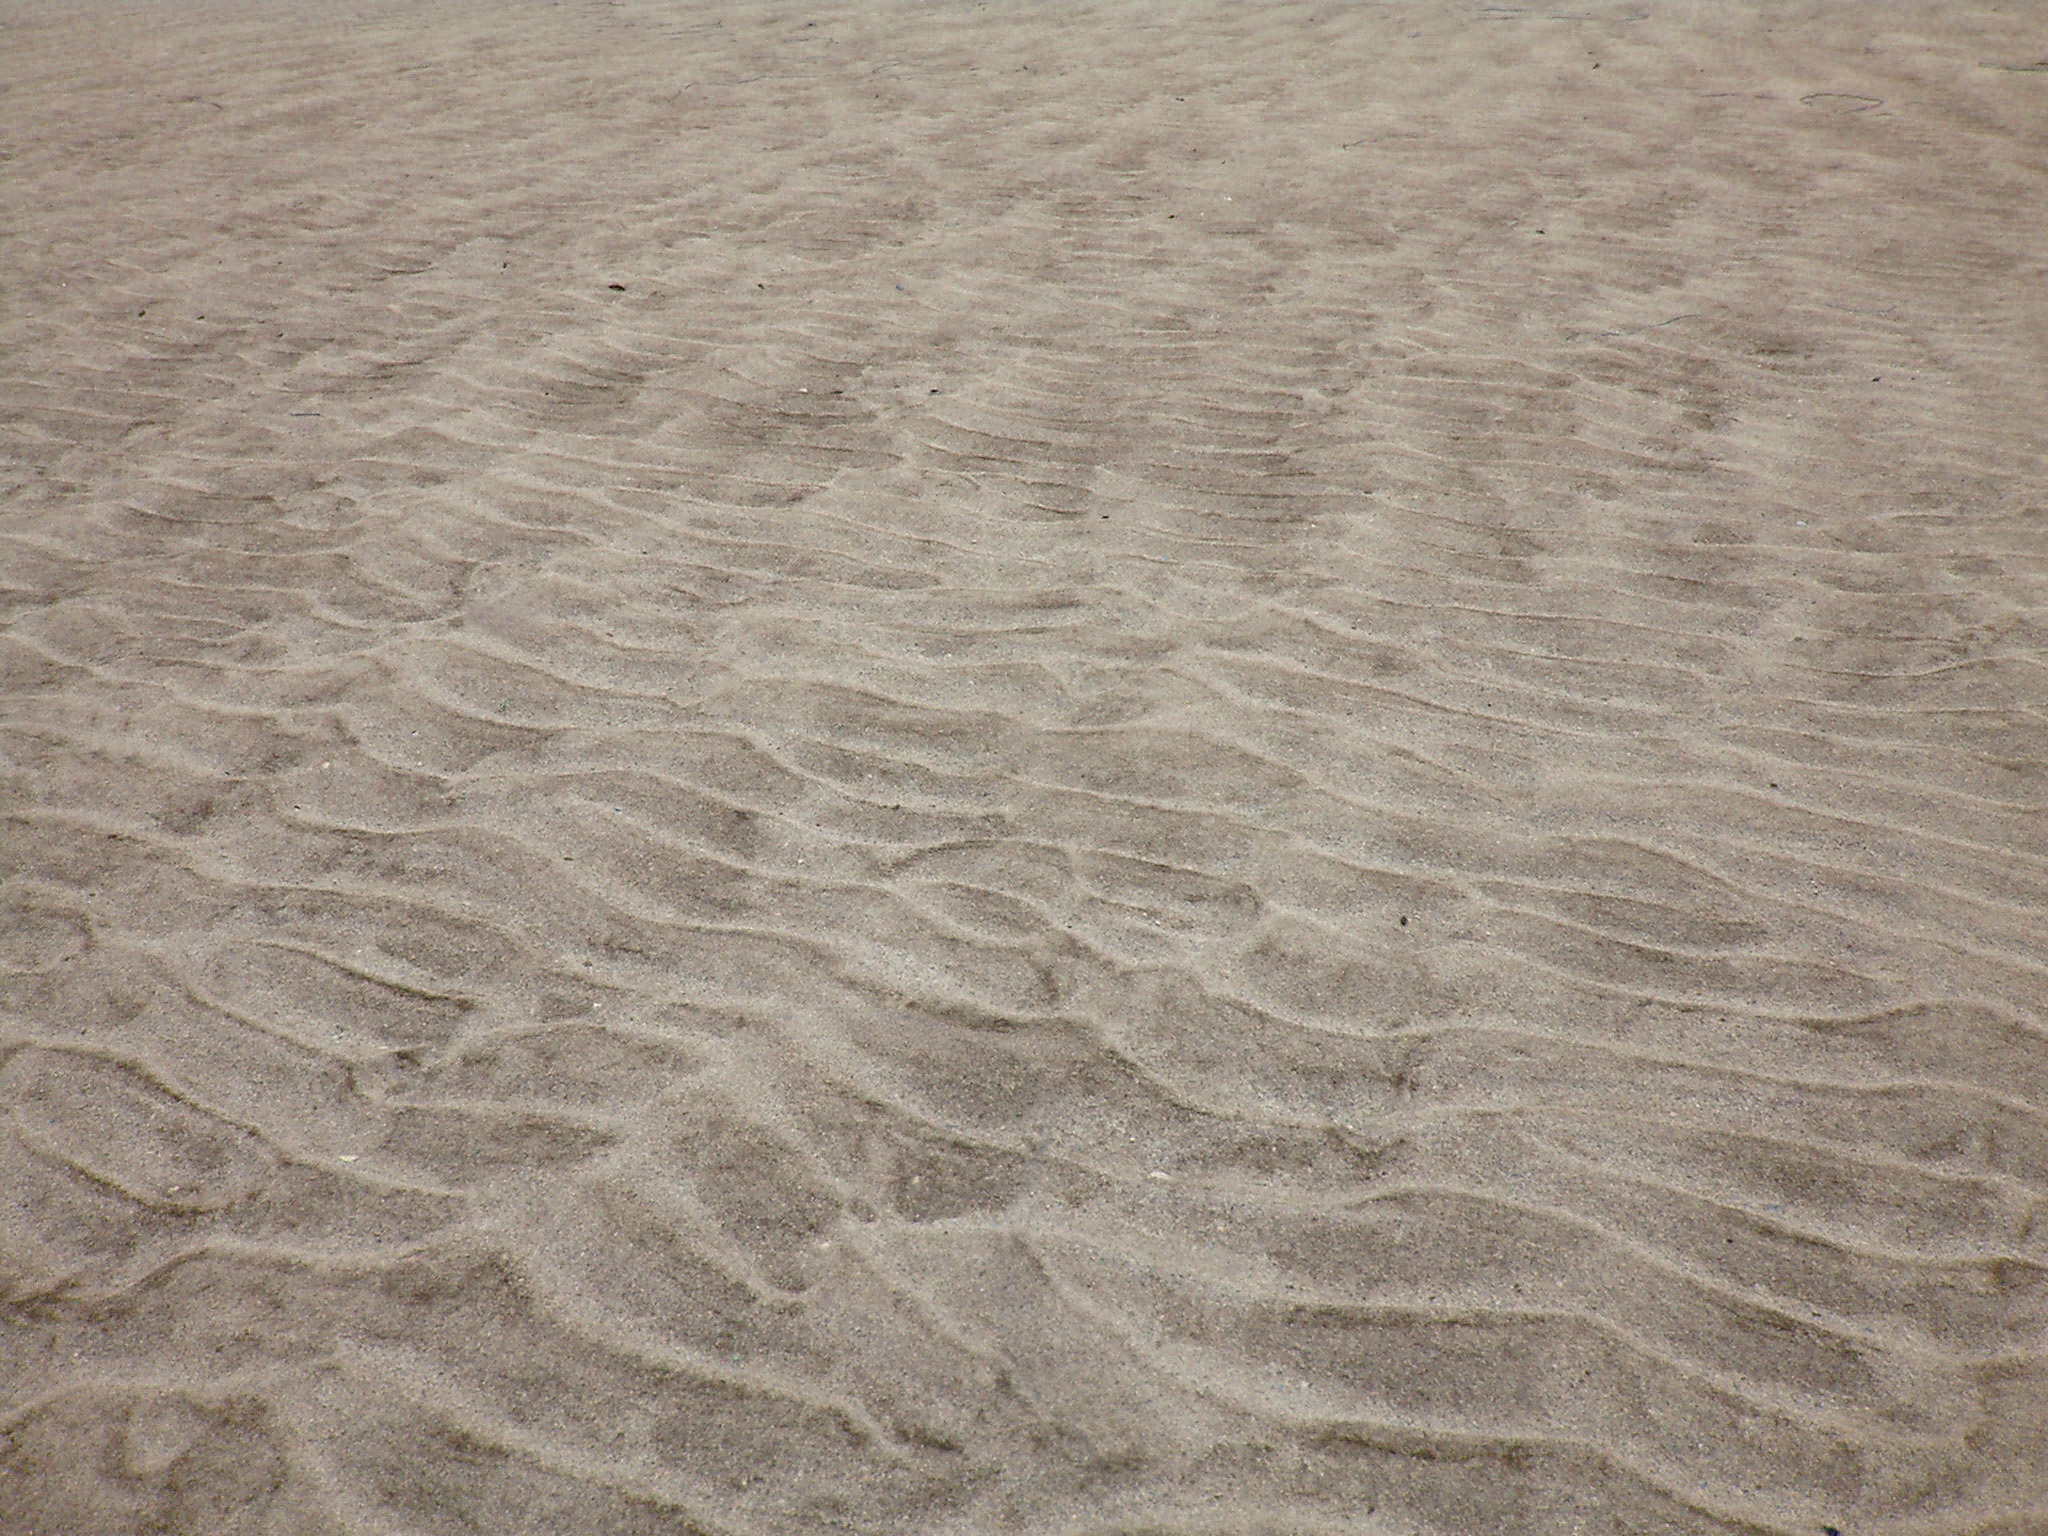 Free Stock Photo 190-sand_ripples_3751.jpg | freeimageslive